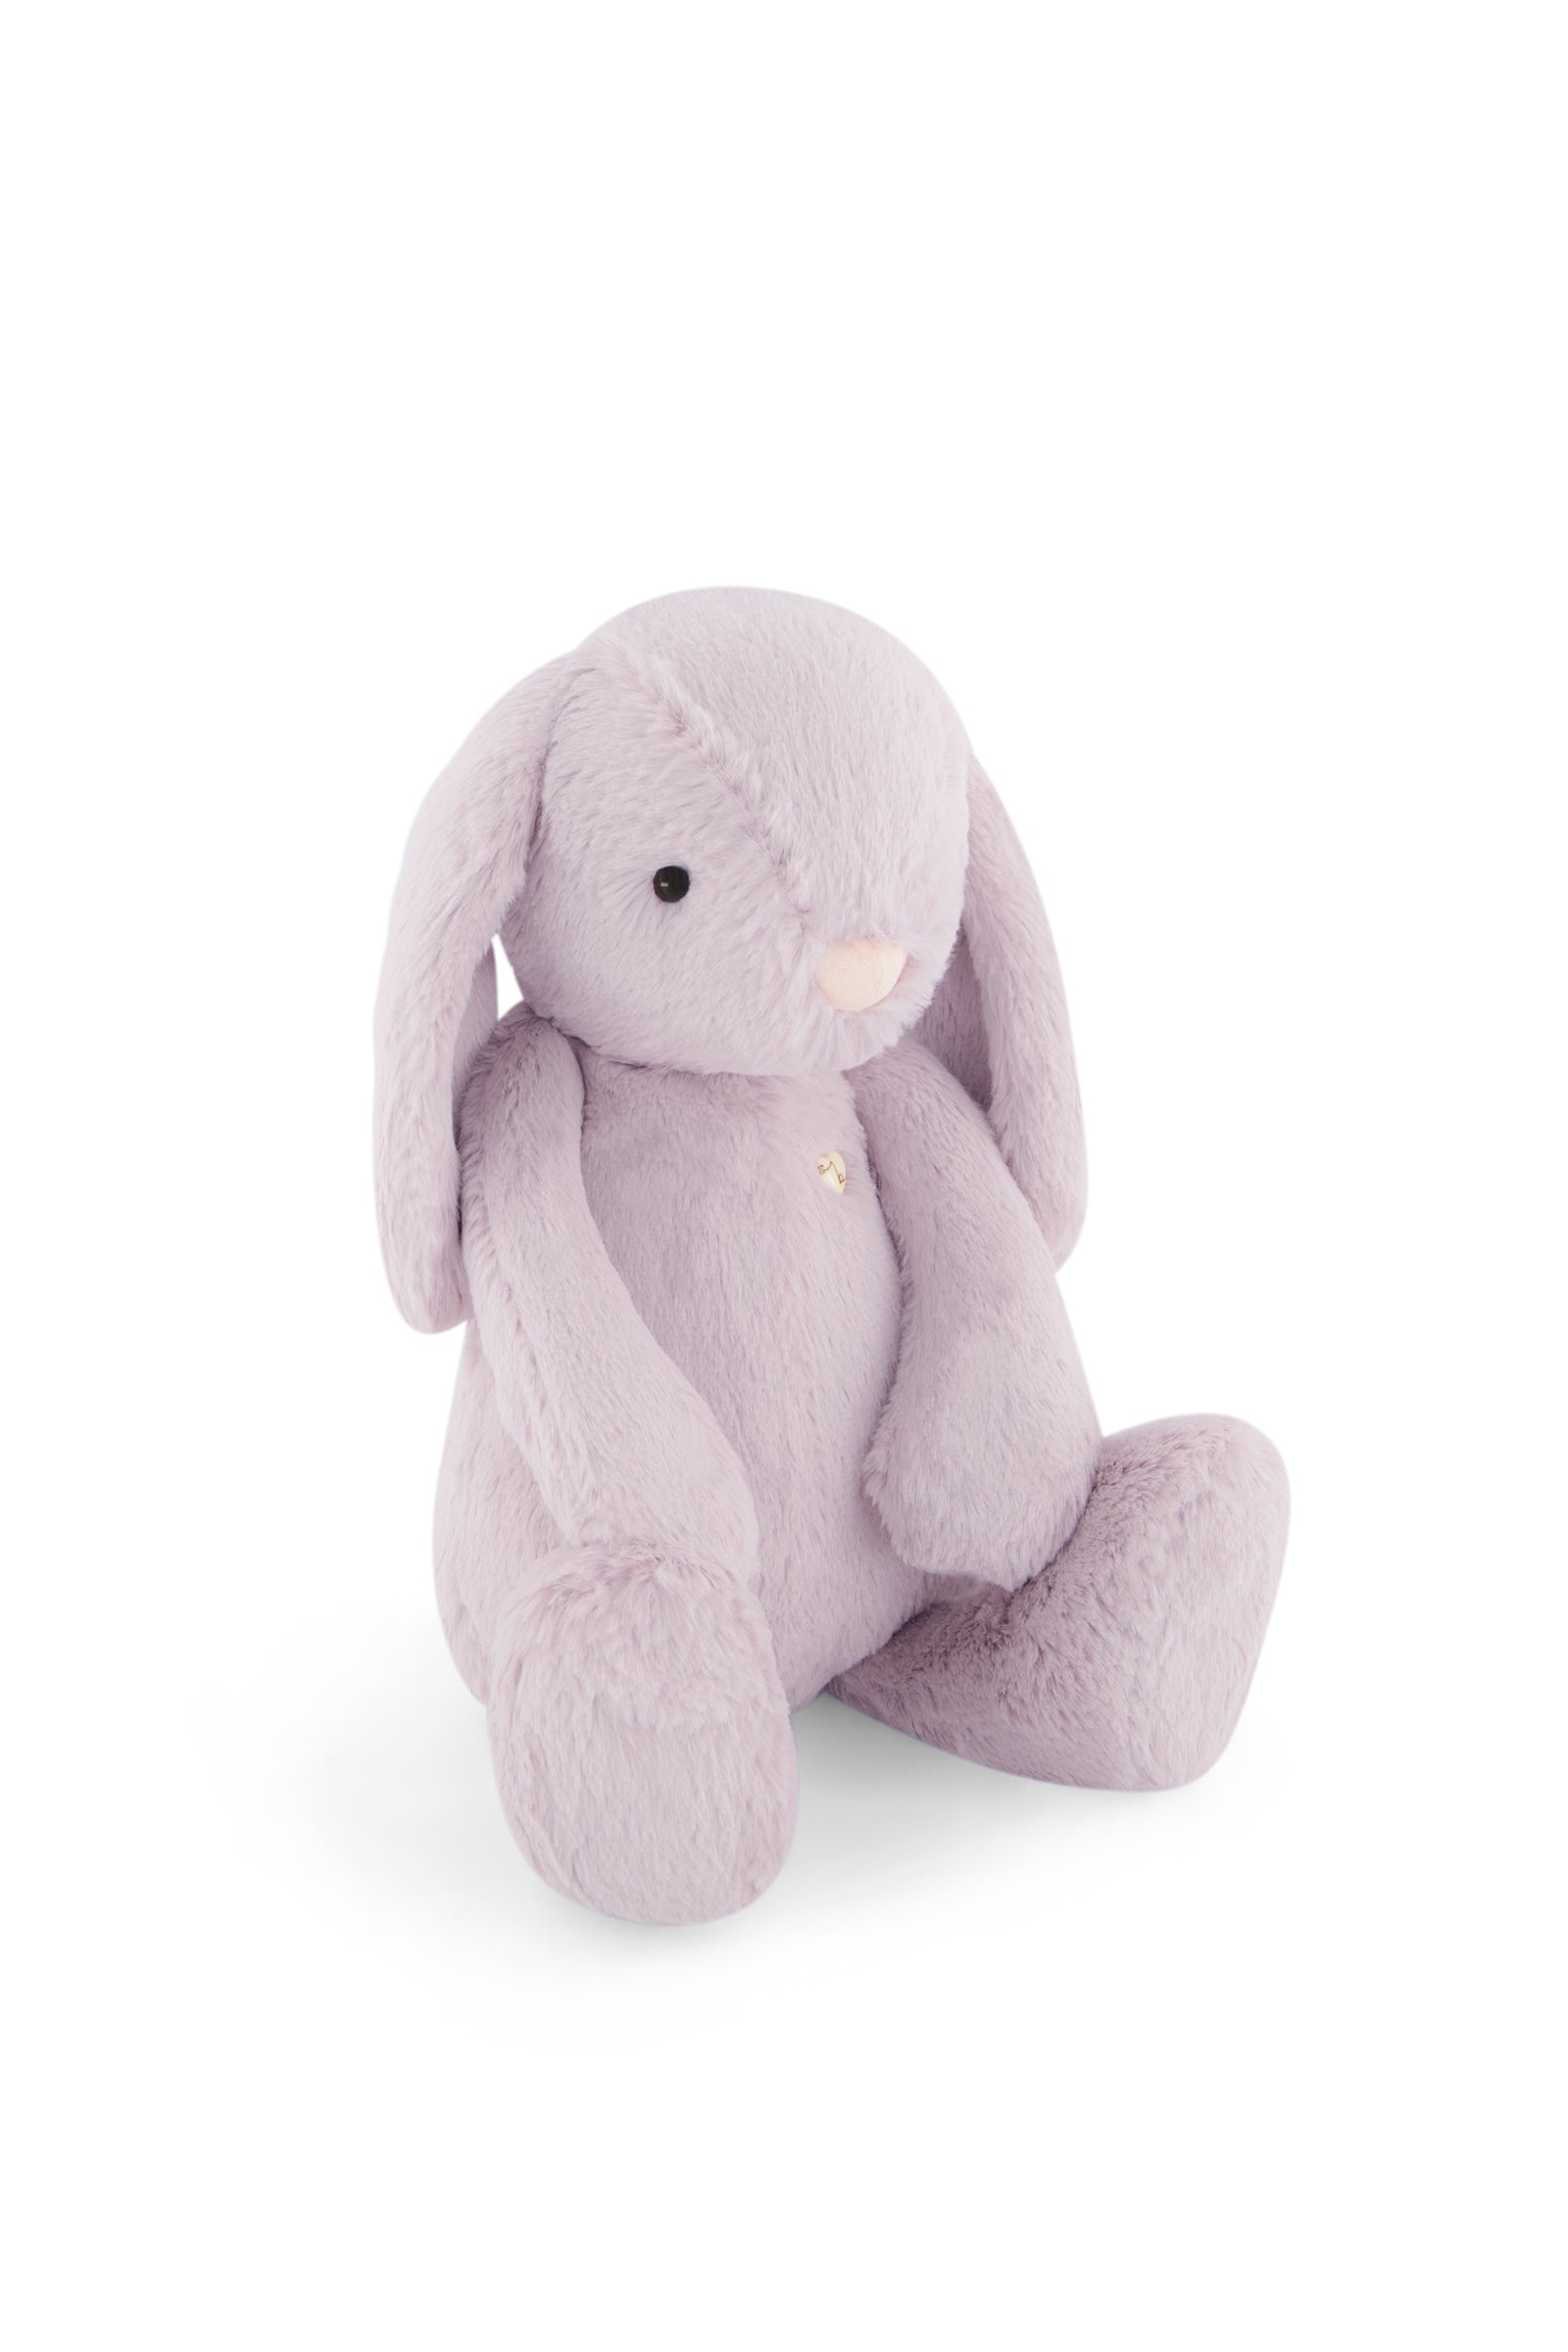 Snuggle Bunnies Penelope the Bunny - Violet